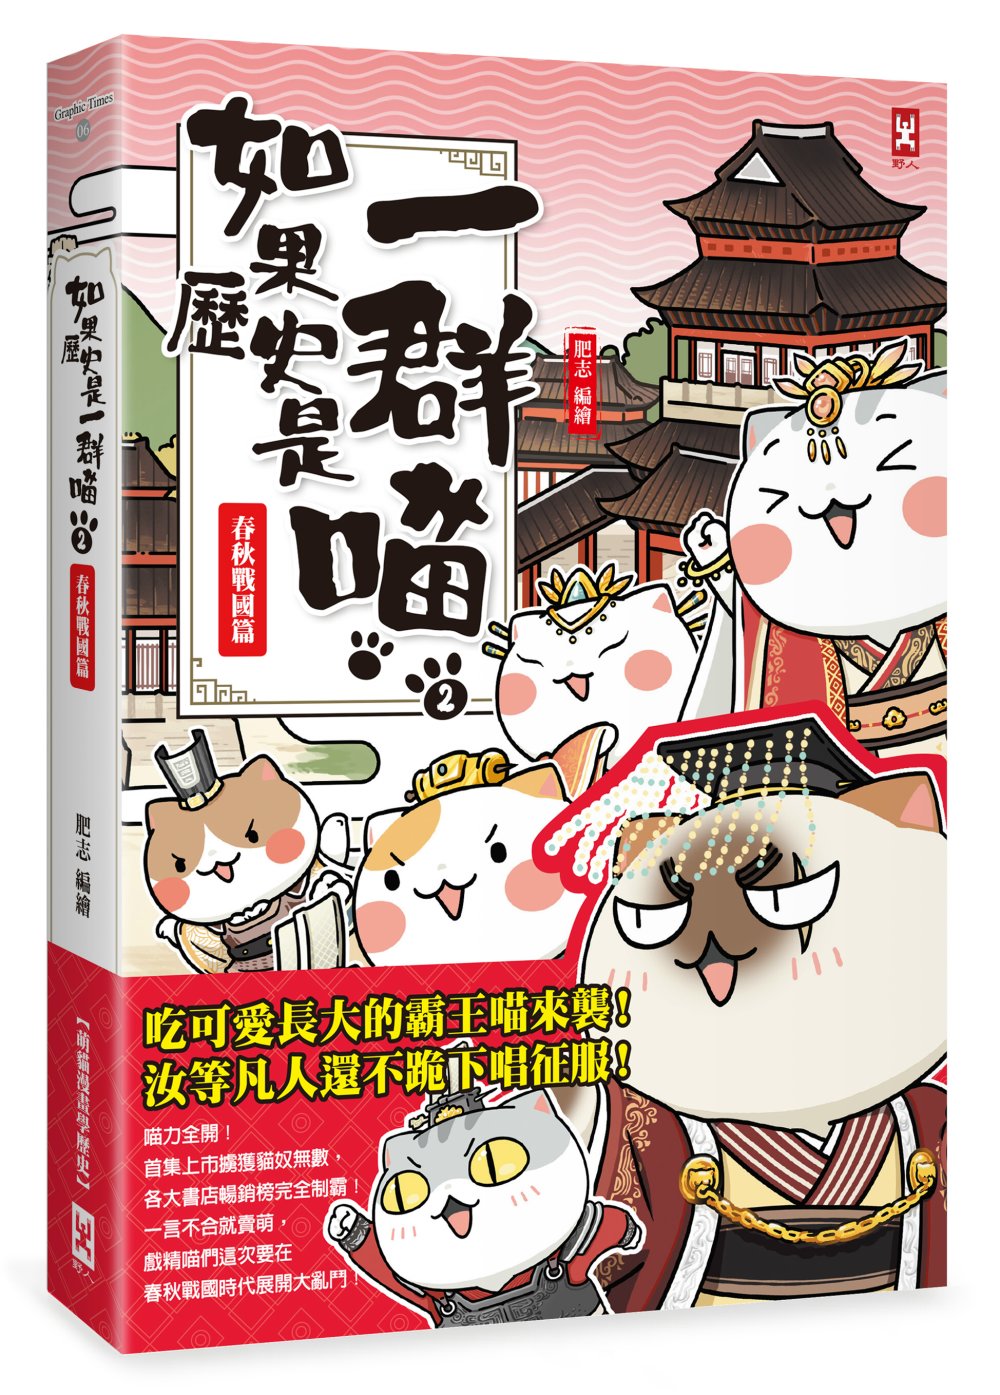 If Chinese History Were Told by Cats #2: The Spring-Autumn Warring States Periods (Manga) • 如果歷史是一群喵(2)：春秋戰國篇【萌貓漫畫學歷史】